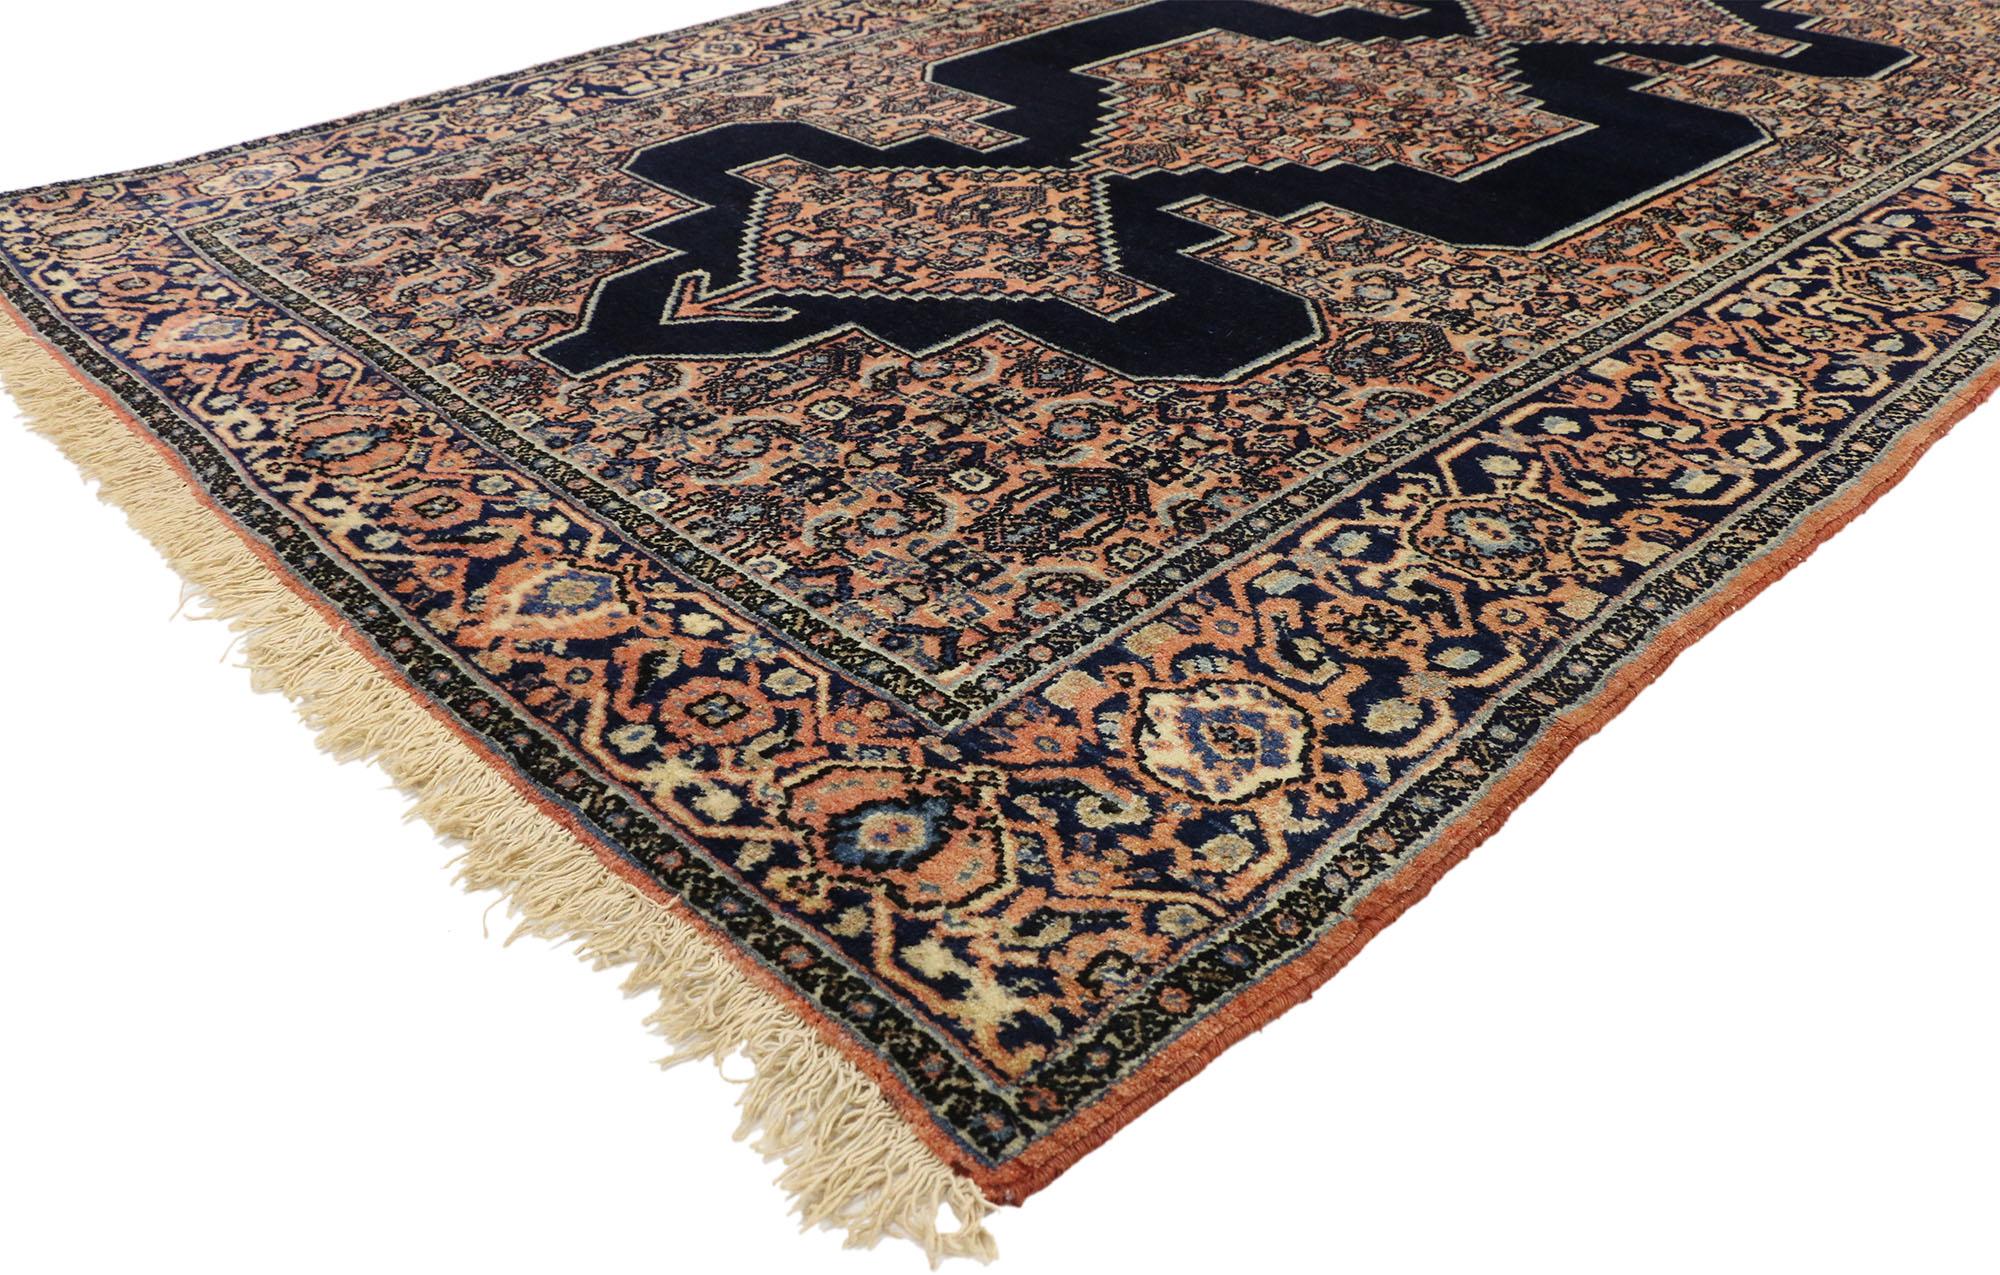 72547 Antique Persian Senneh Rug with Modern Style 04'04 X 06'09. This hand-knotted wool antique Persian Senneh rug with modern style features a triple stacked medallion in an open abrashed navy blue field surrounded by a complementary spandrel and